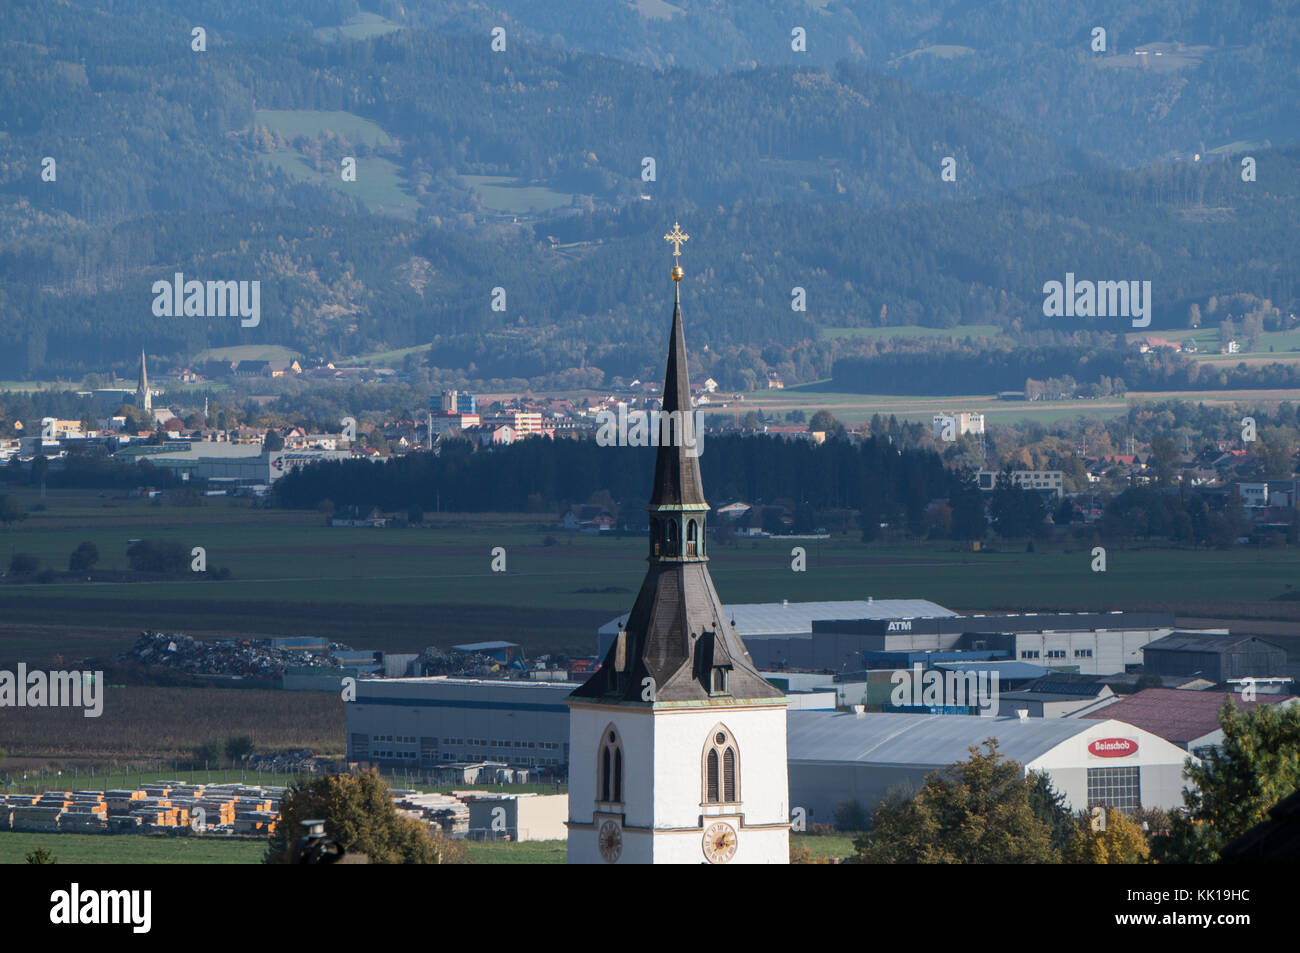 Fohnsdorf, Austria - 12.10.2017: The village Church spire in the foreground with the Mur river valley in the background Stock Photo